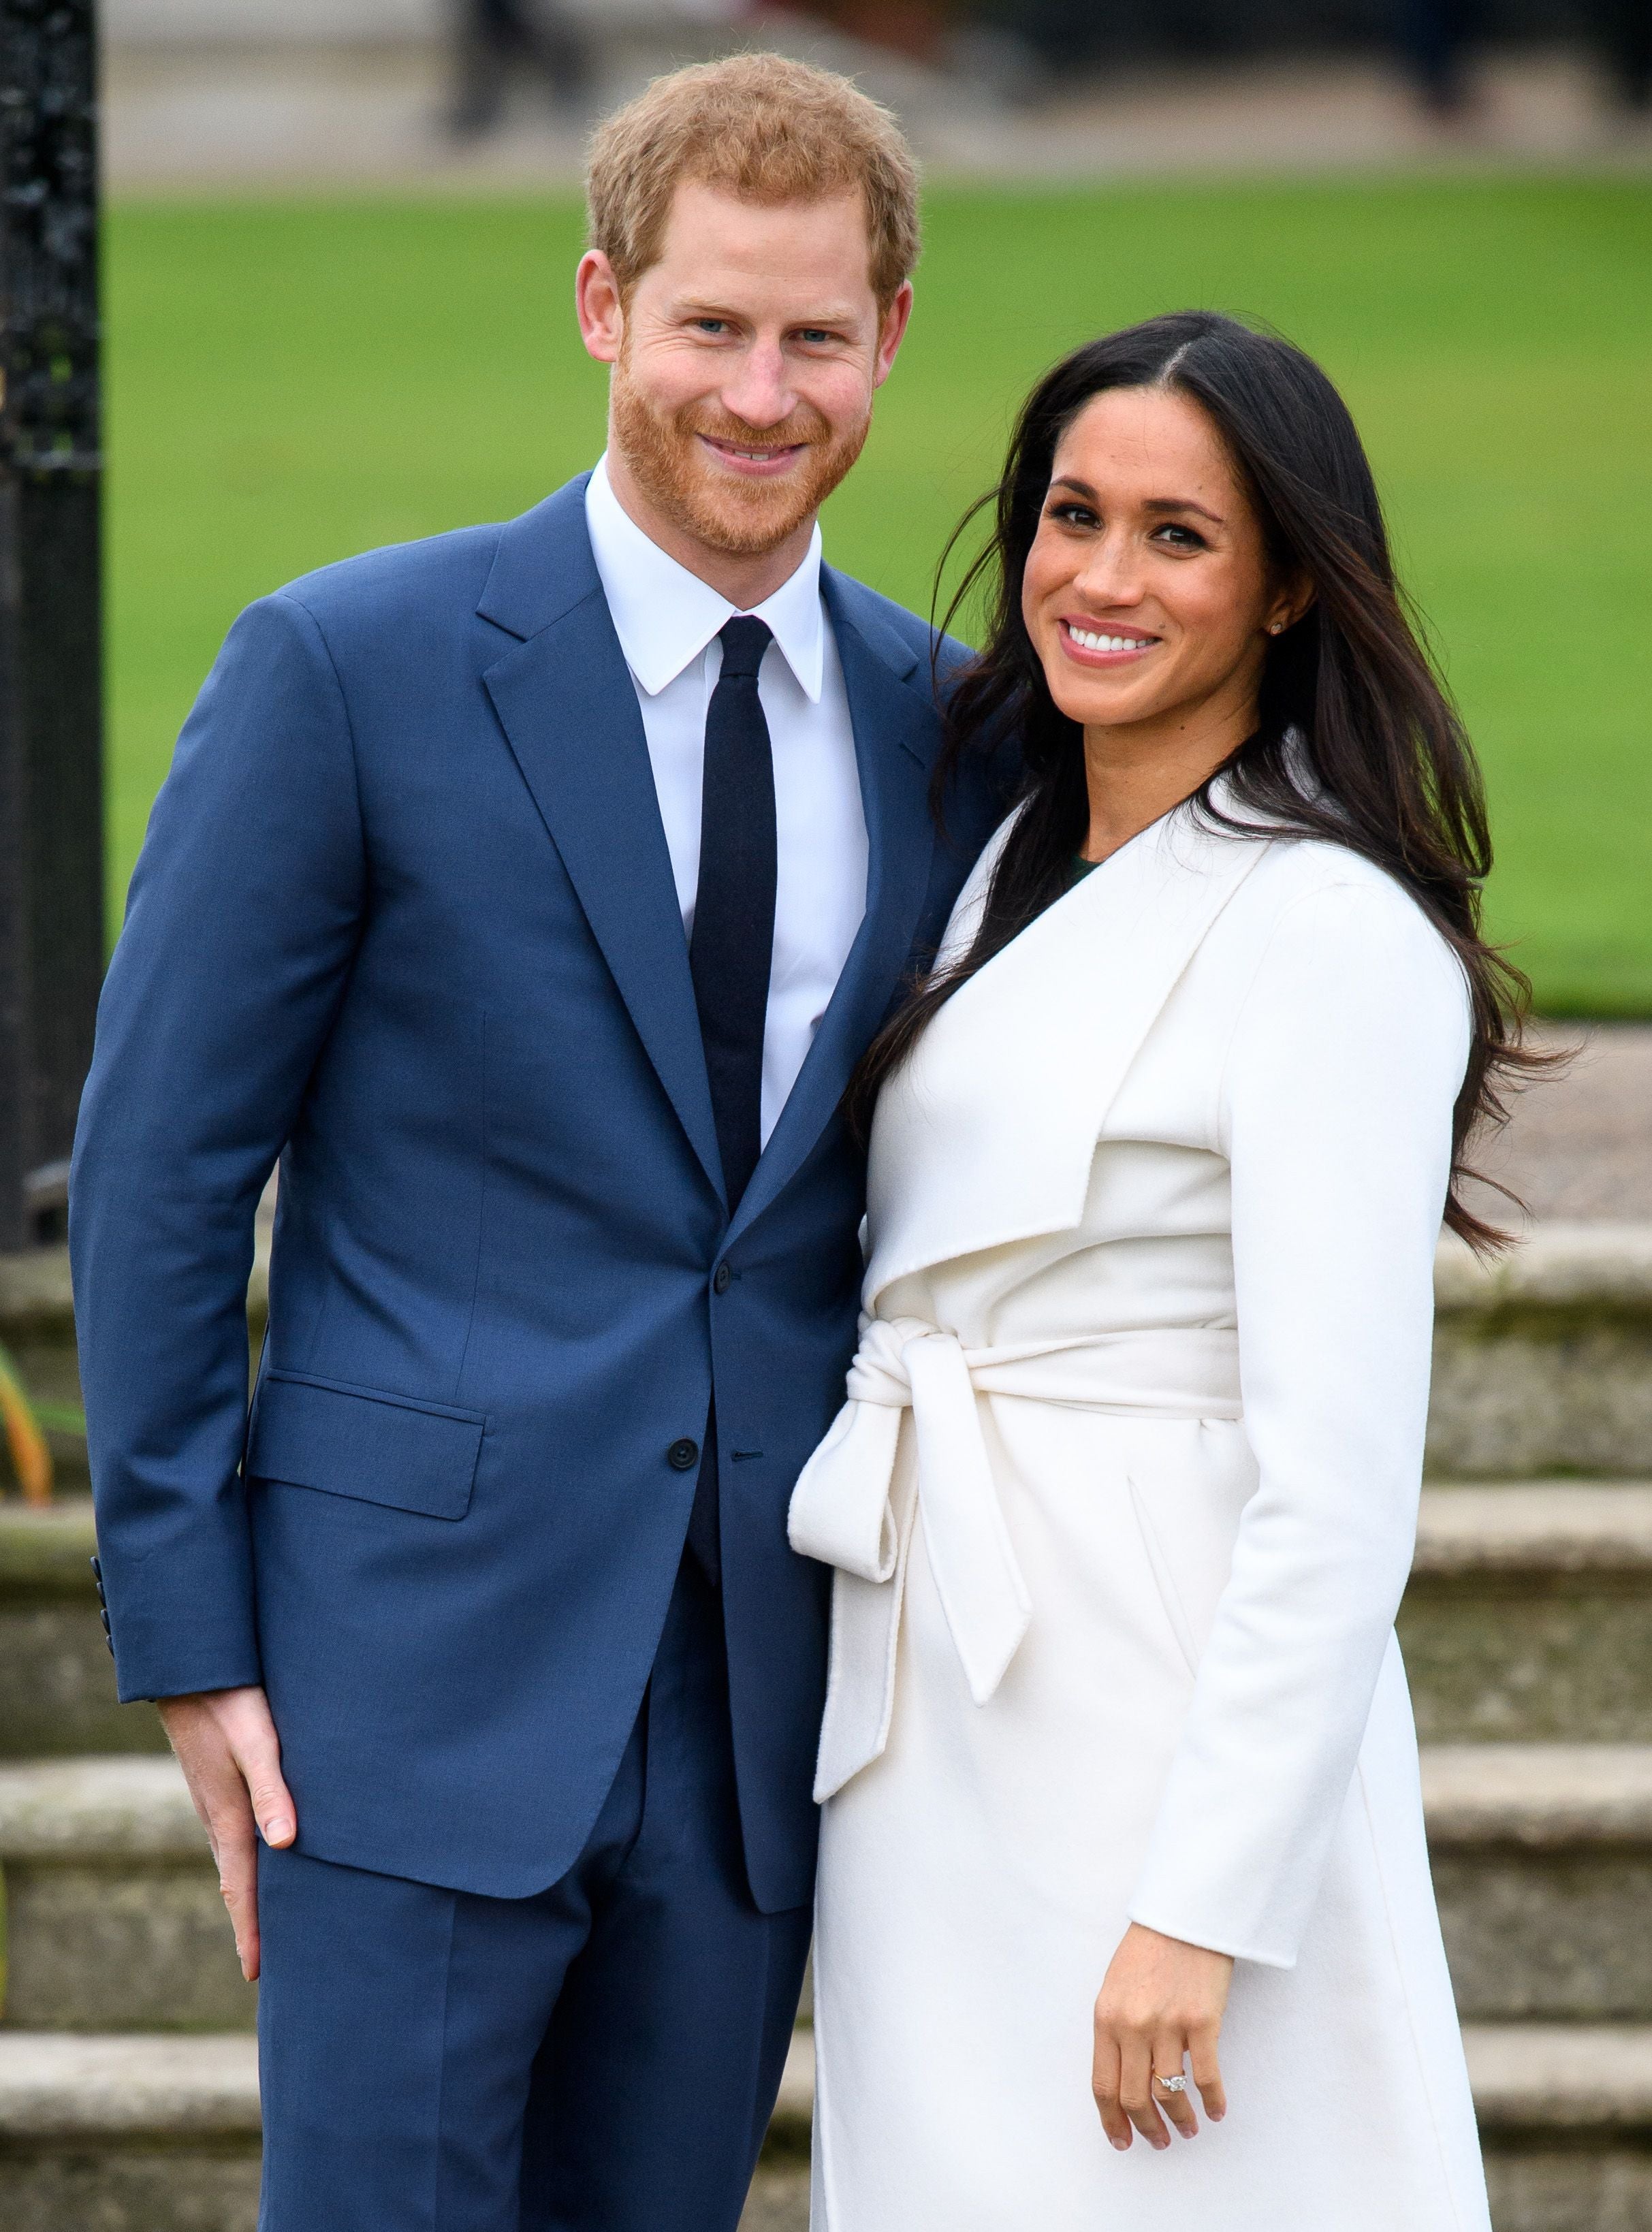 You'll Never Guess Where Prince Harry And Meghan Markle Are Spending Valentine's Day
